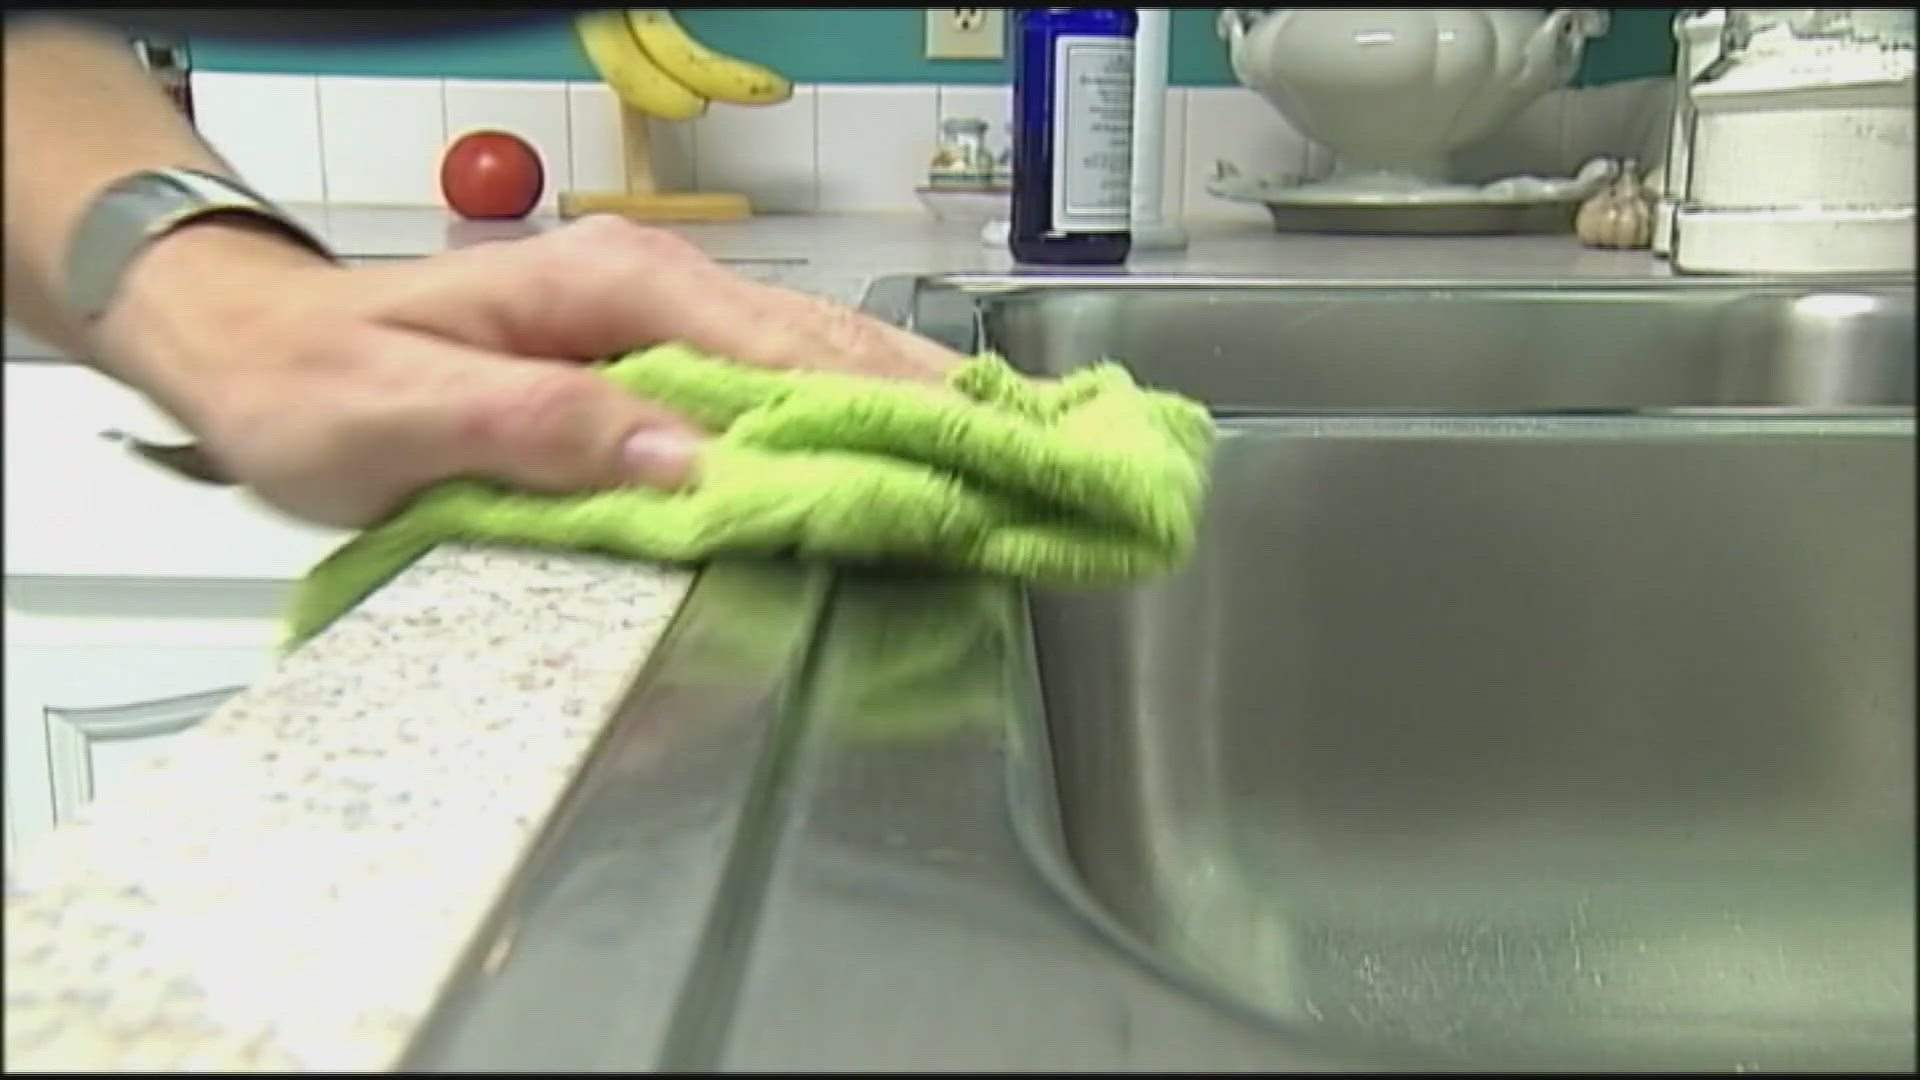 Consider Cherie Lowe's spring cleaning strategies to keep you sane while tackling your chores.